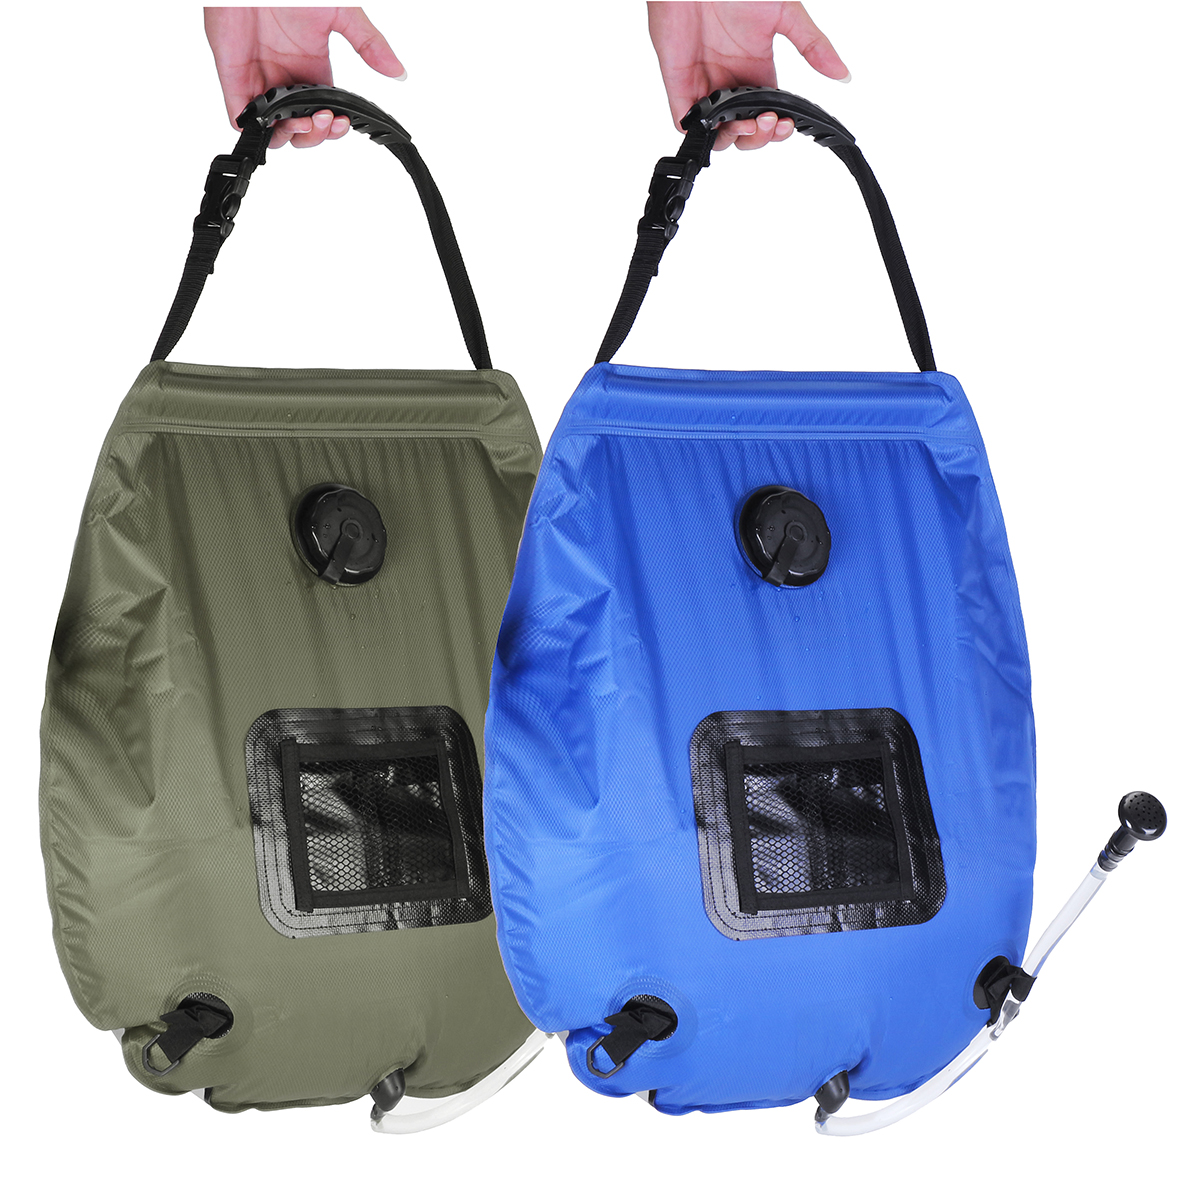 20L-Foldable-Portable-Water-Shower-Bathing-Bag-Solar-Energy-Heated-PVC-Outdoor-Travel-Camping-1724741-9